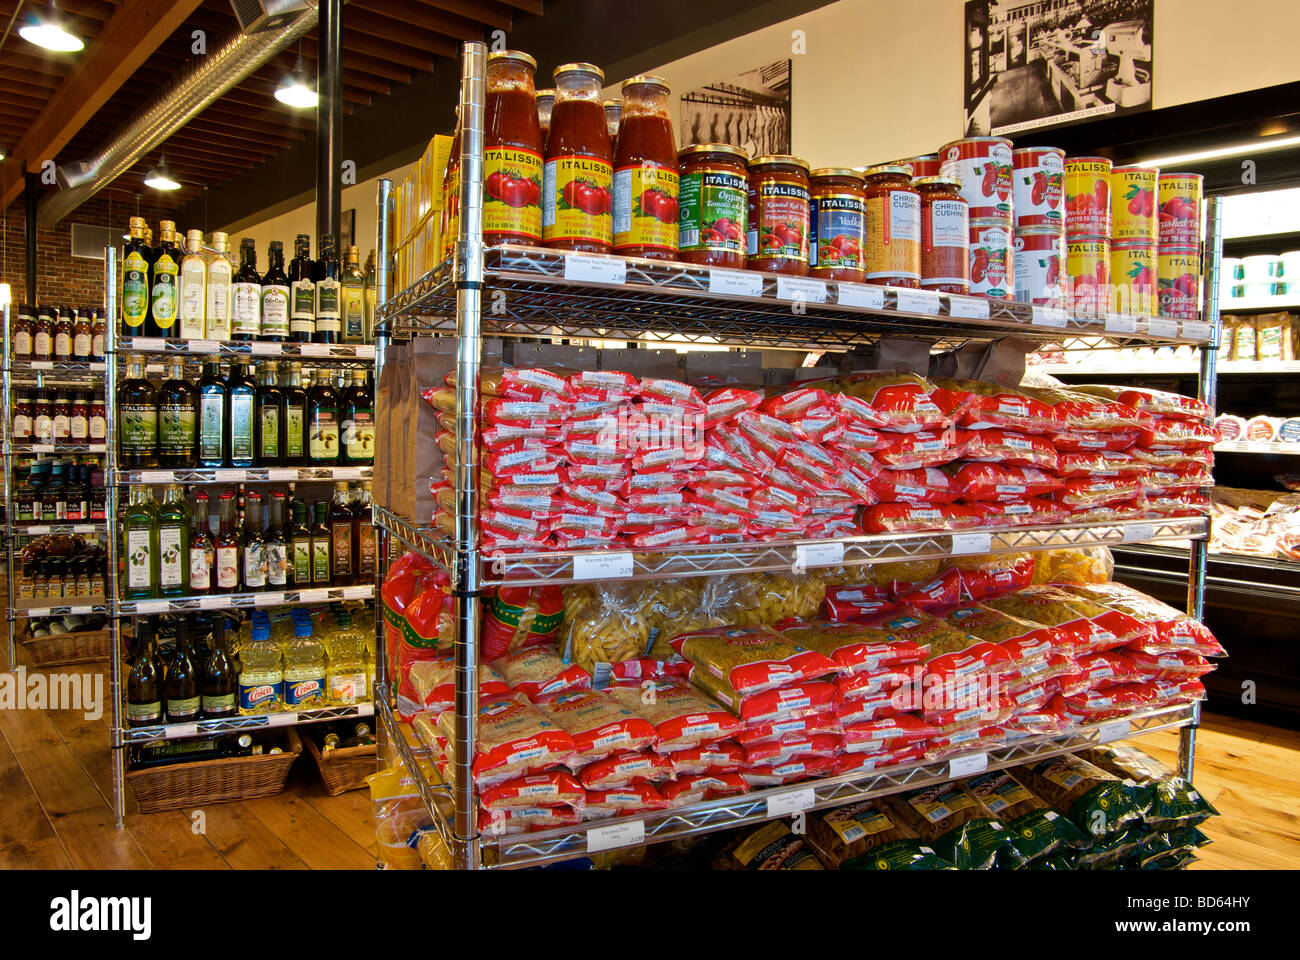 Centre aisle shelving in grocery store with dried canned foods pastas vegetables bottled condiments sauces Stock Photo